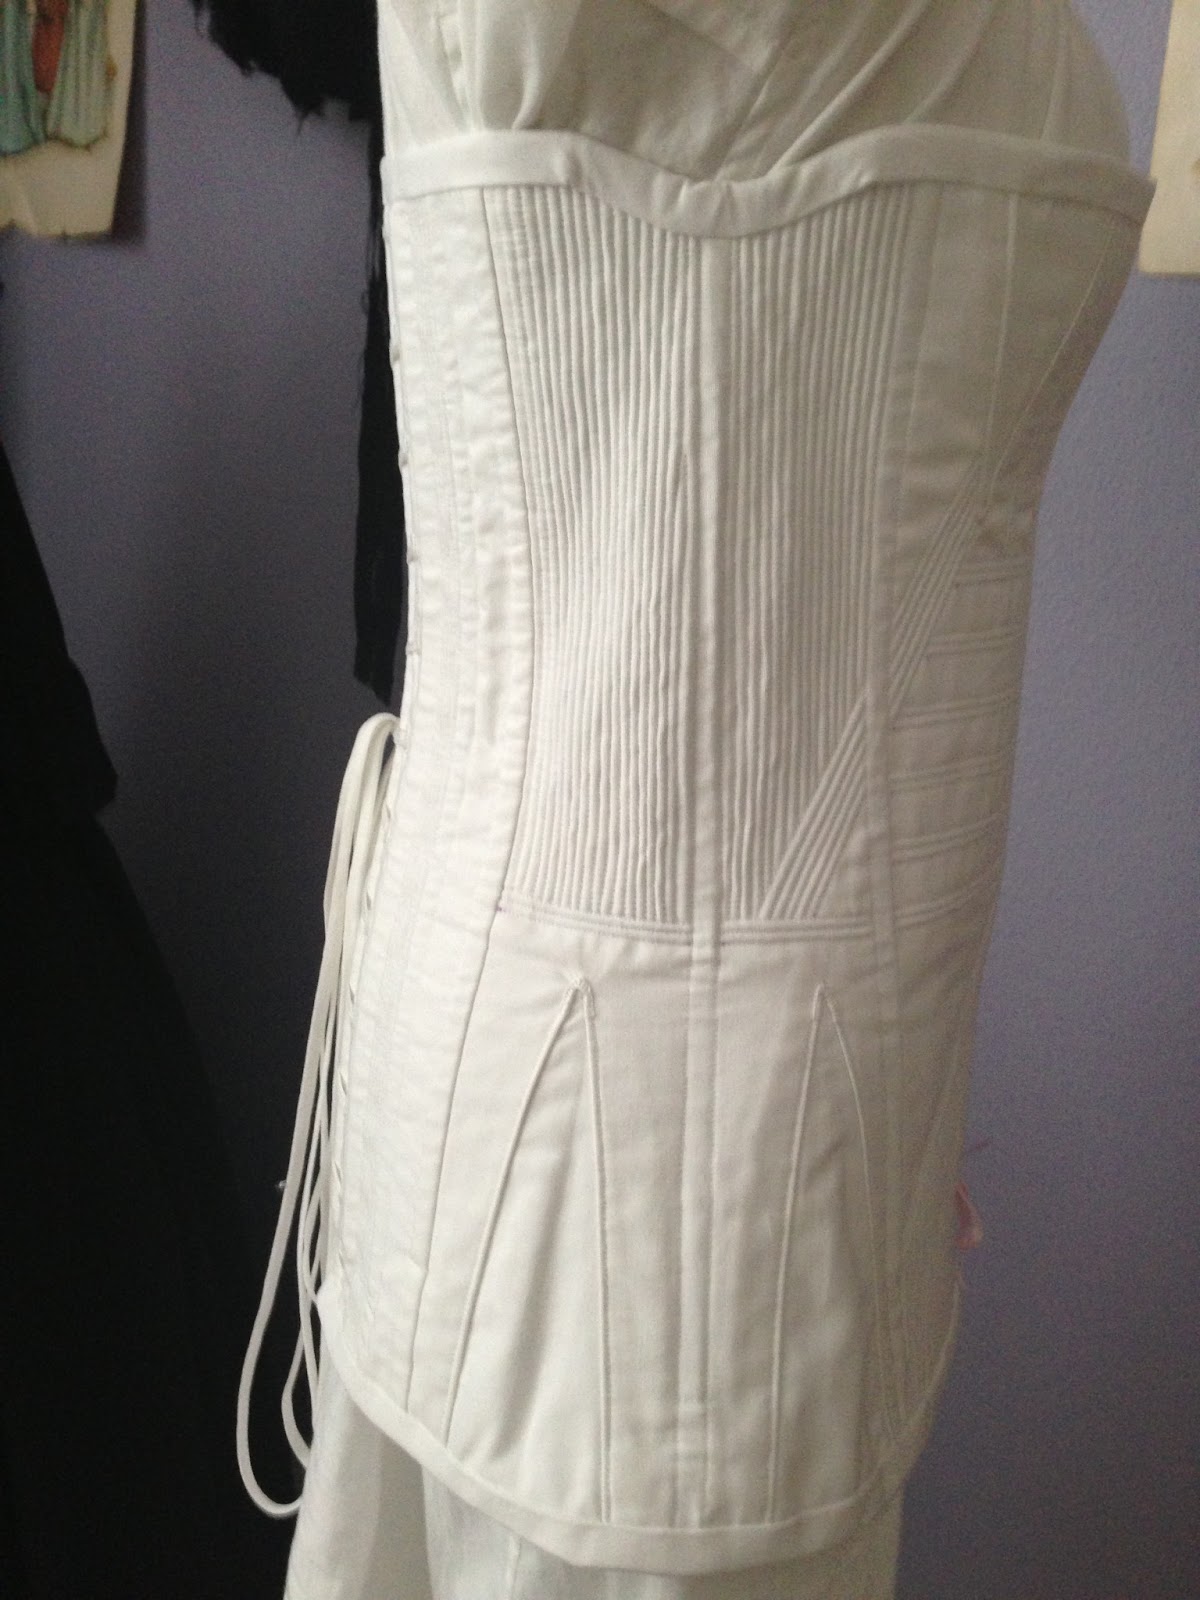 Beauty From Ashes: Regency Era Corded Stays Sewing Binge!!!!